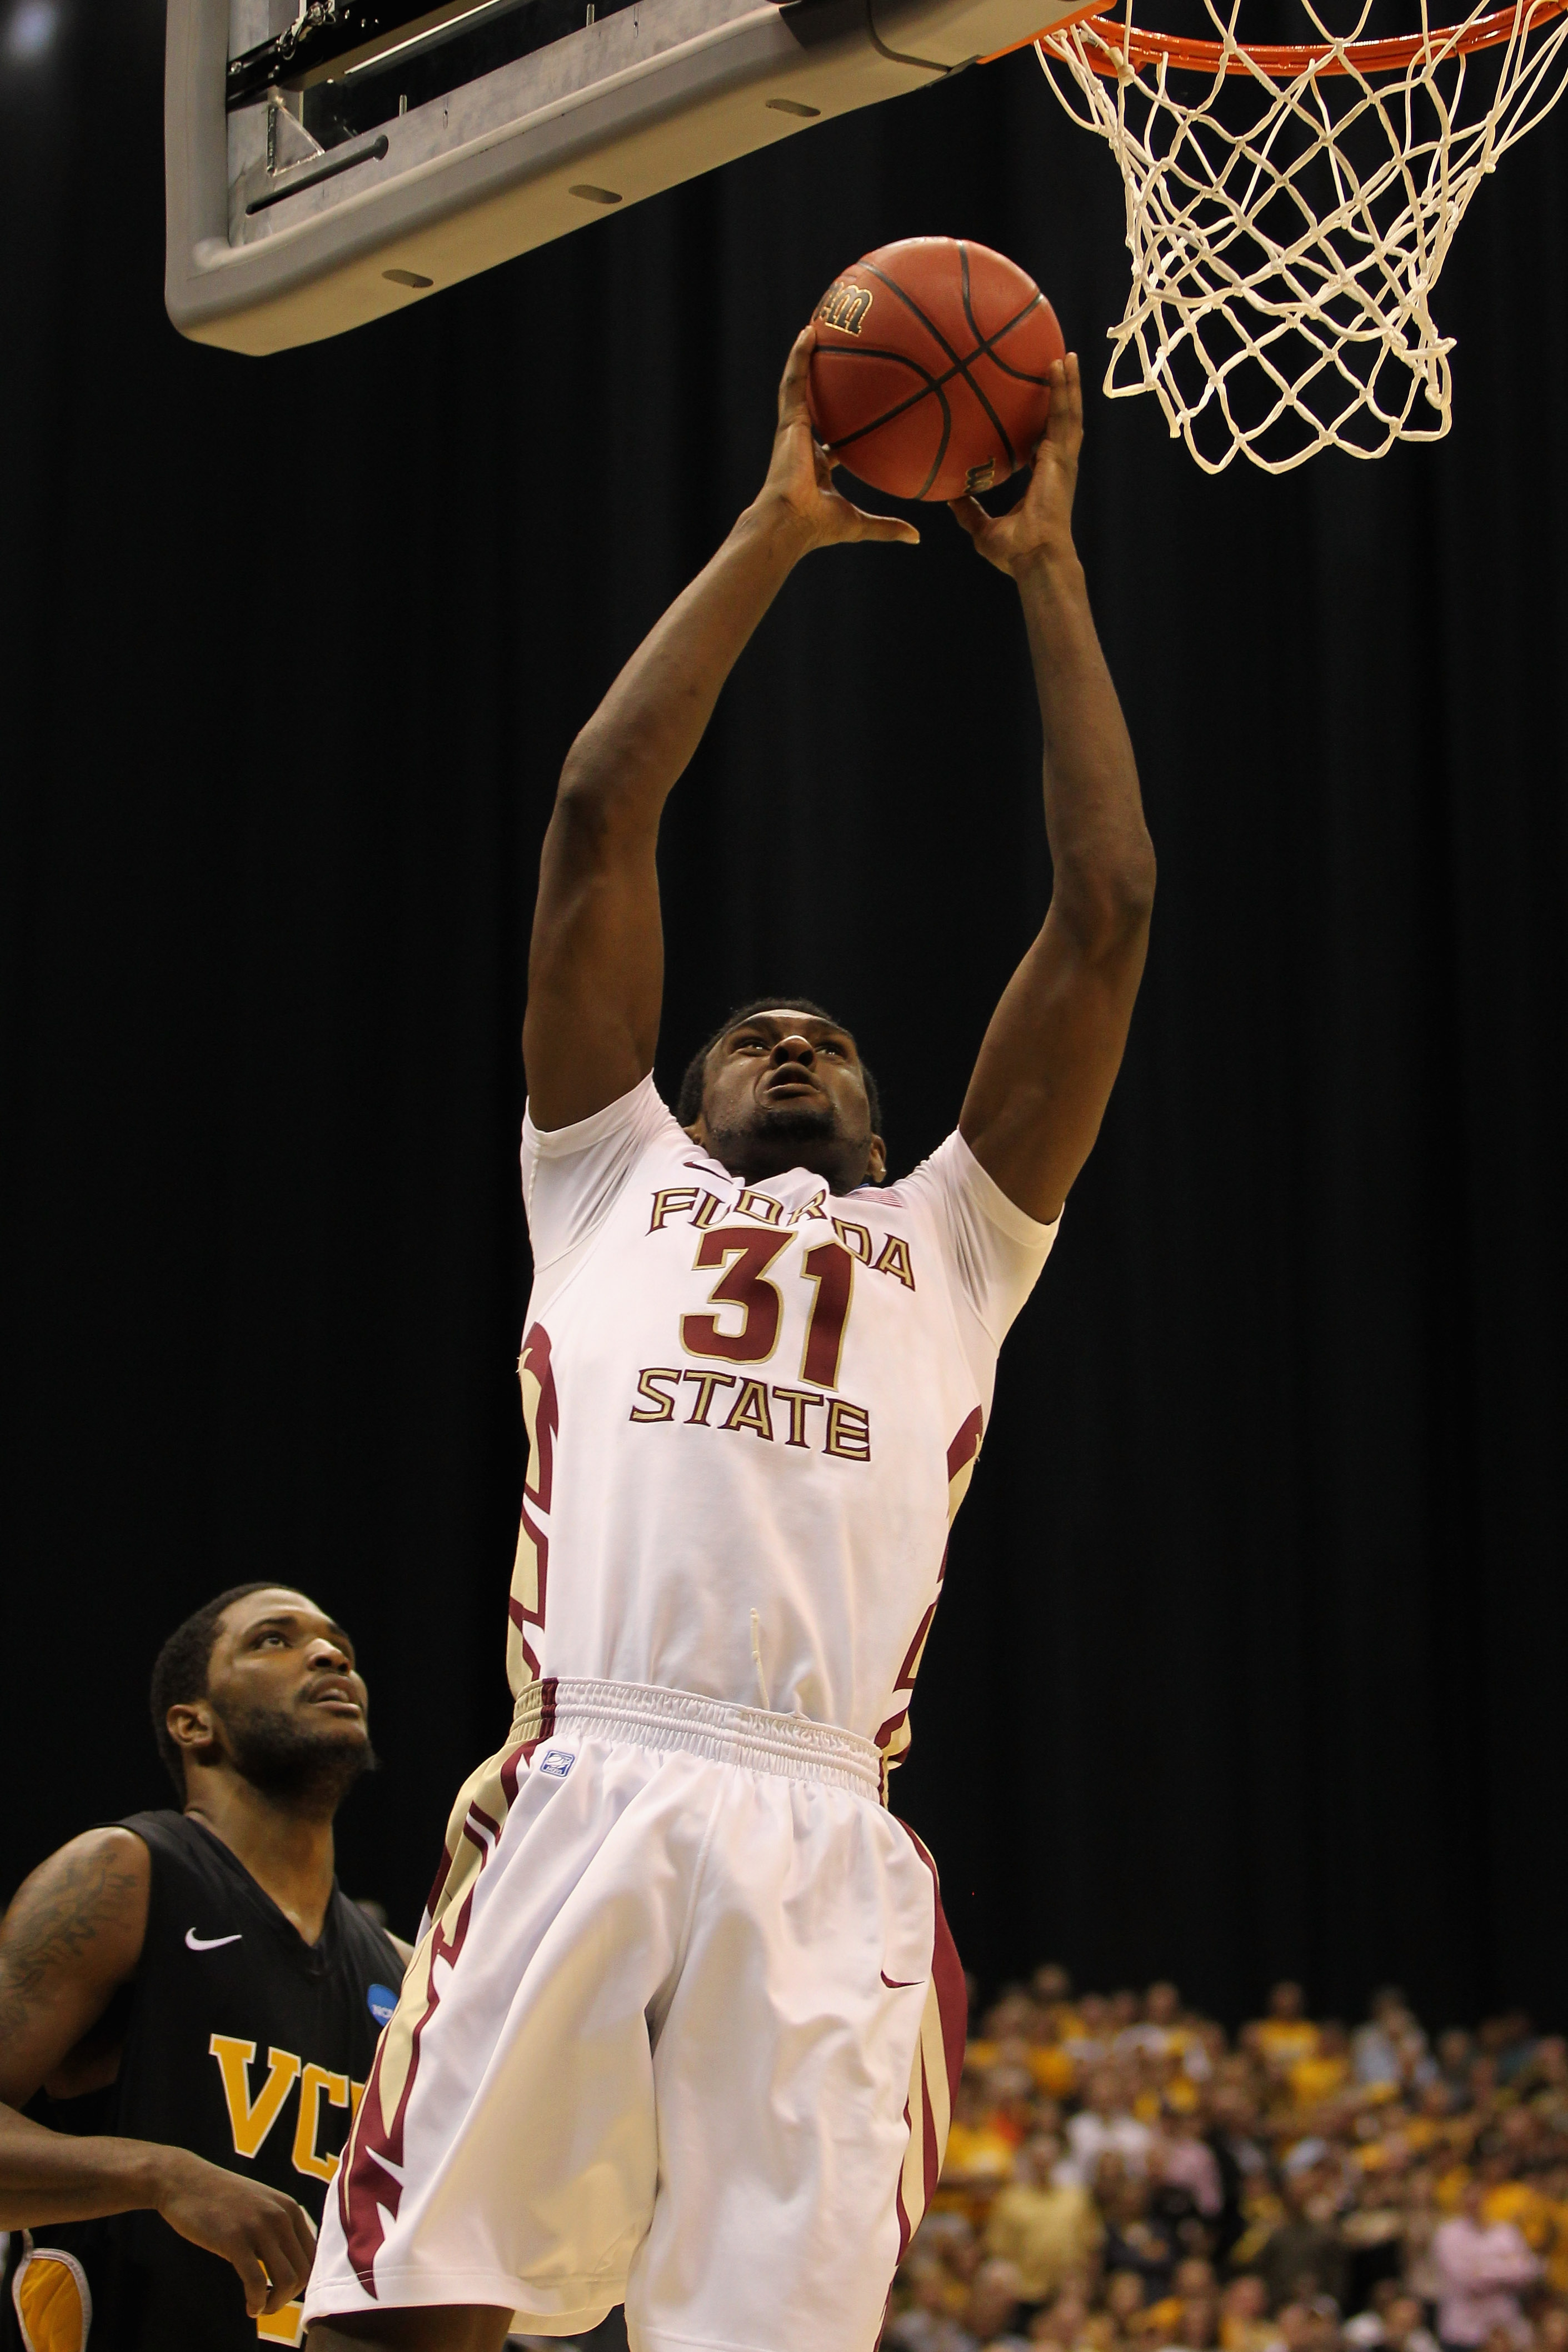 SAN ANTONIO, TX - MARCH 25:  Chris Singleton #31 of the Florida State Seminoles goes to the basket against Jamie Skeen #21 of the Virginia Commonwealth Rams during the southwest regional of the 2011 NCAA men's basketball tournament at the Alamodome on Mar